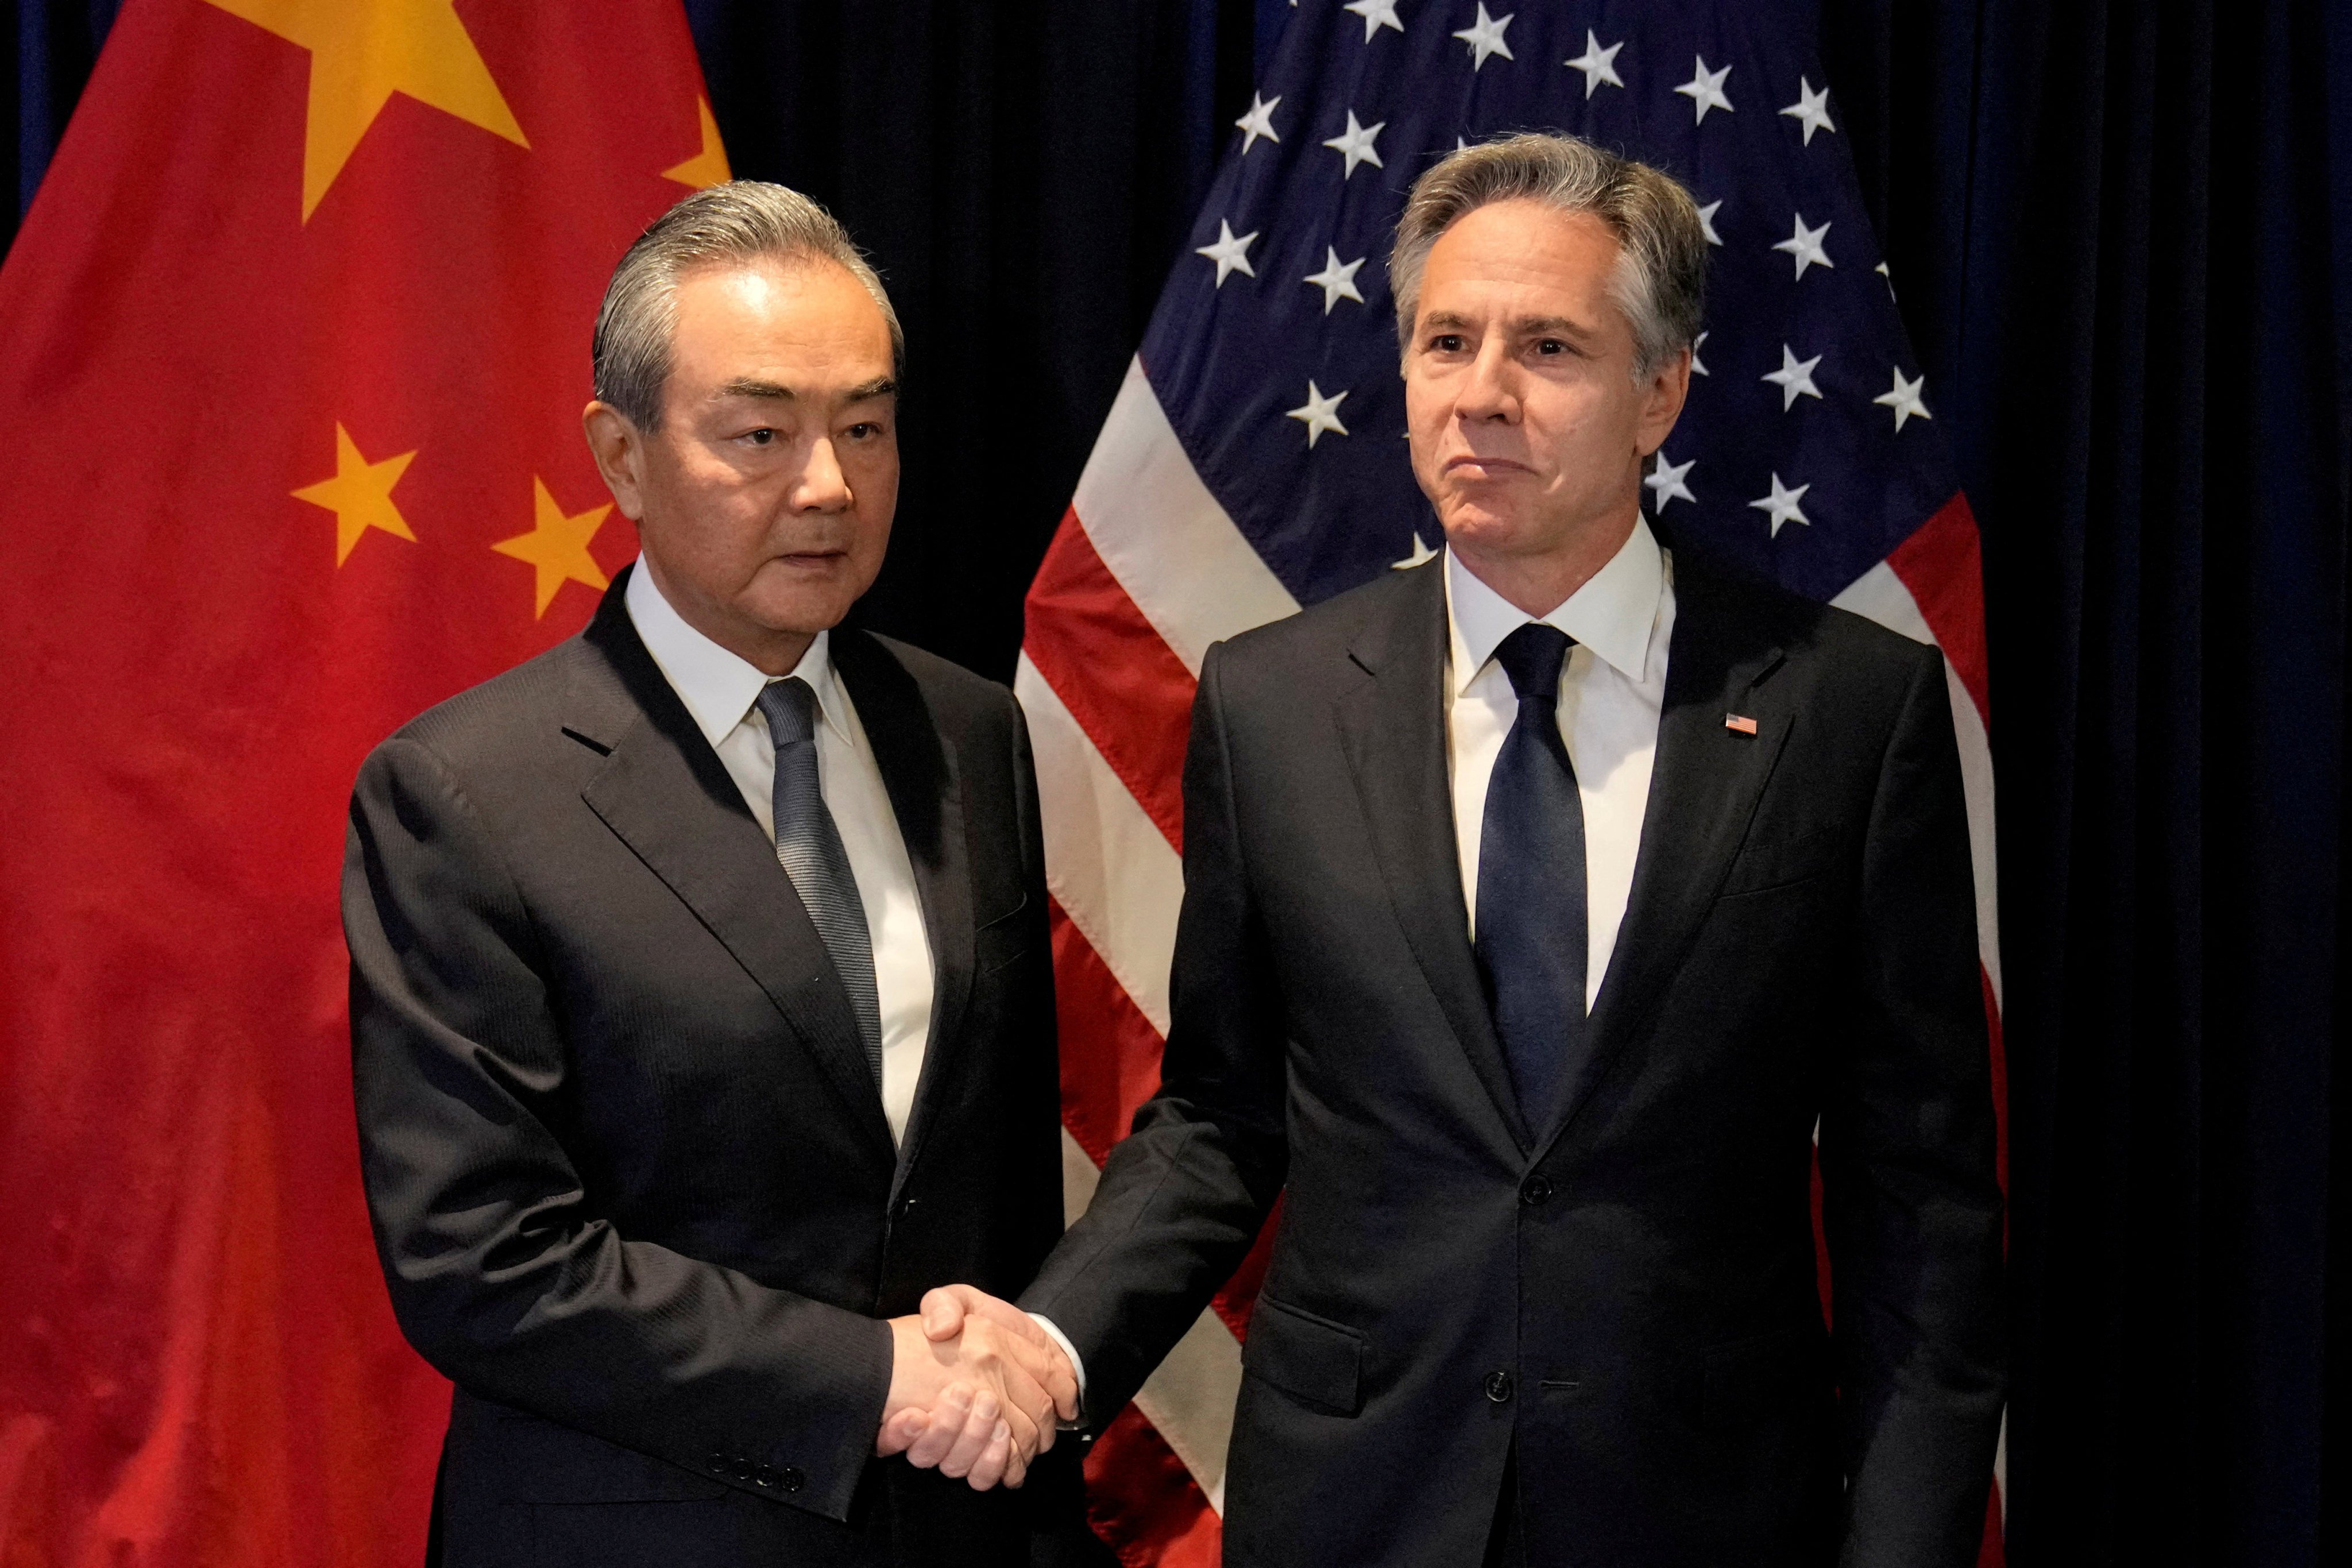 Top Chinese diplomat Wang Yi and US Secretary of State Antony Blinken shake hands during their bilateral discussion on the sidelines of an Association of Southeast Asian Nations meeting in Jakarta, Indonesia, on July 13, 2023. Photo: Reuters